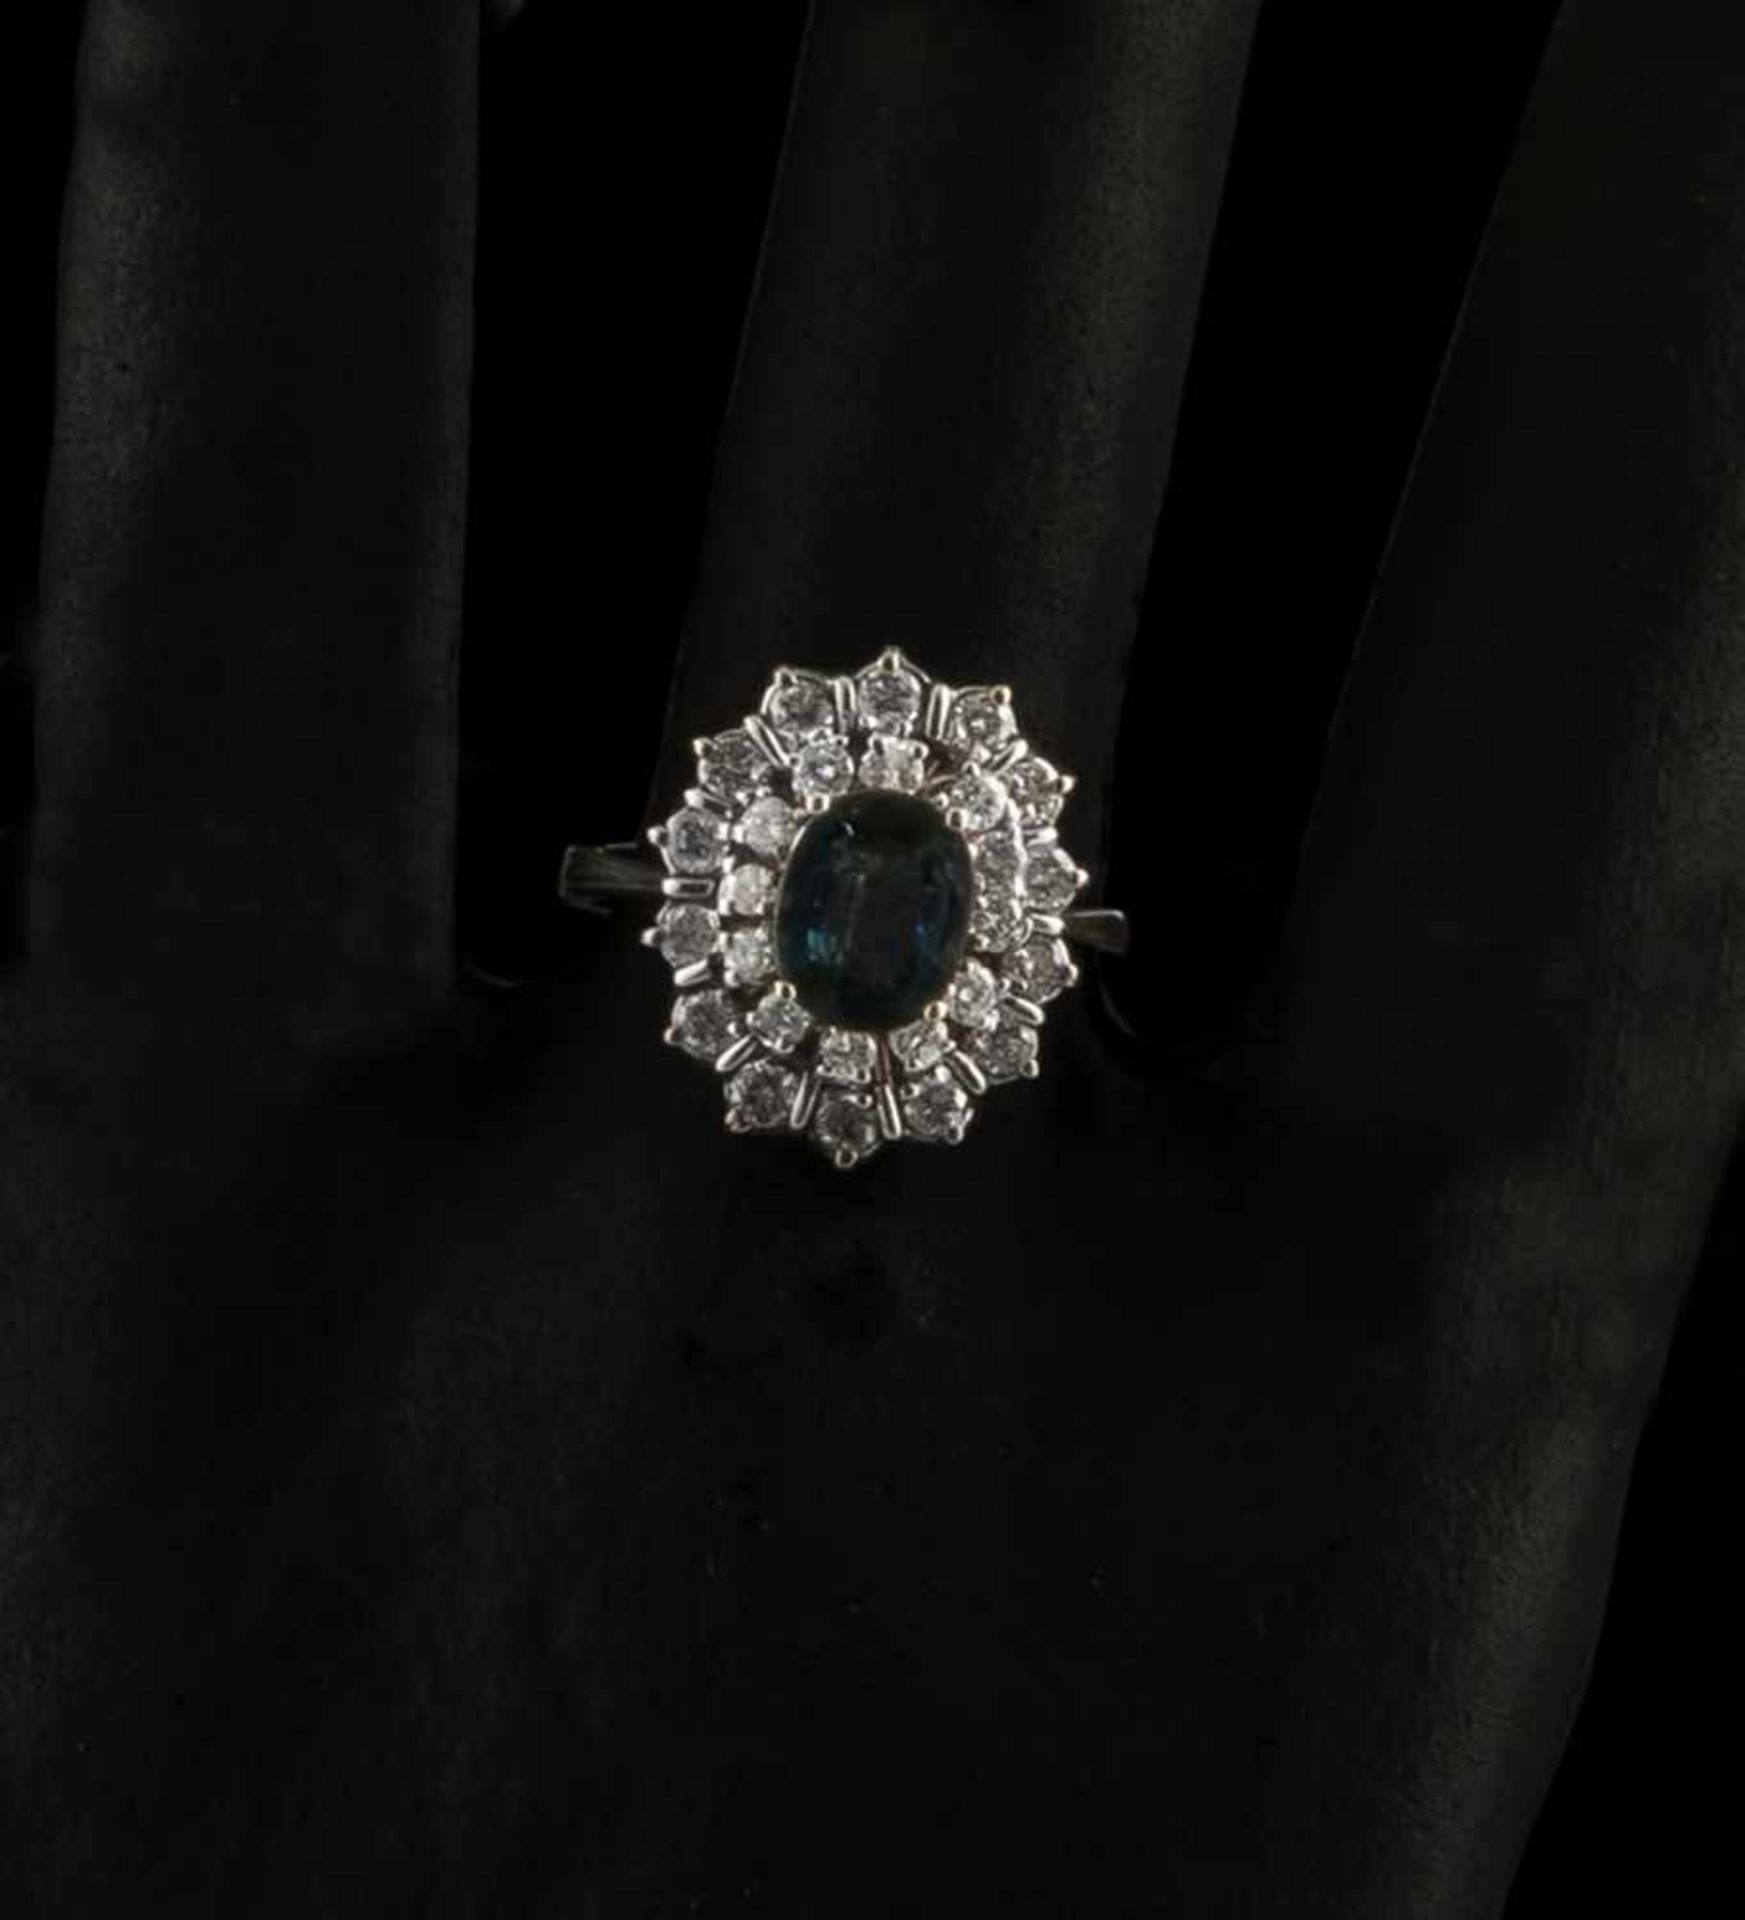 A SAPPHIRE AND DIAMOND RING, 1960ies. 585 white gold, oval cut sapphire c. 2 ct., 26 diamonds tog.c.